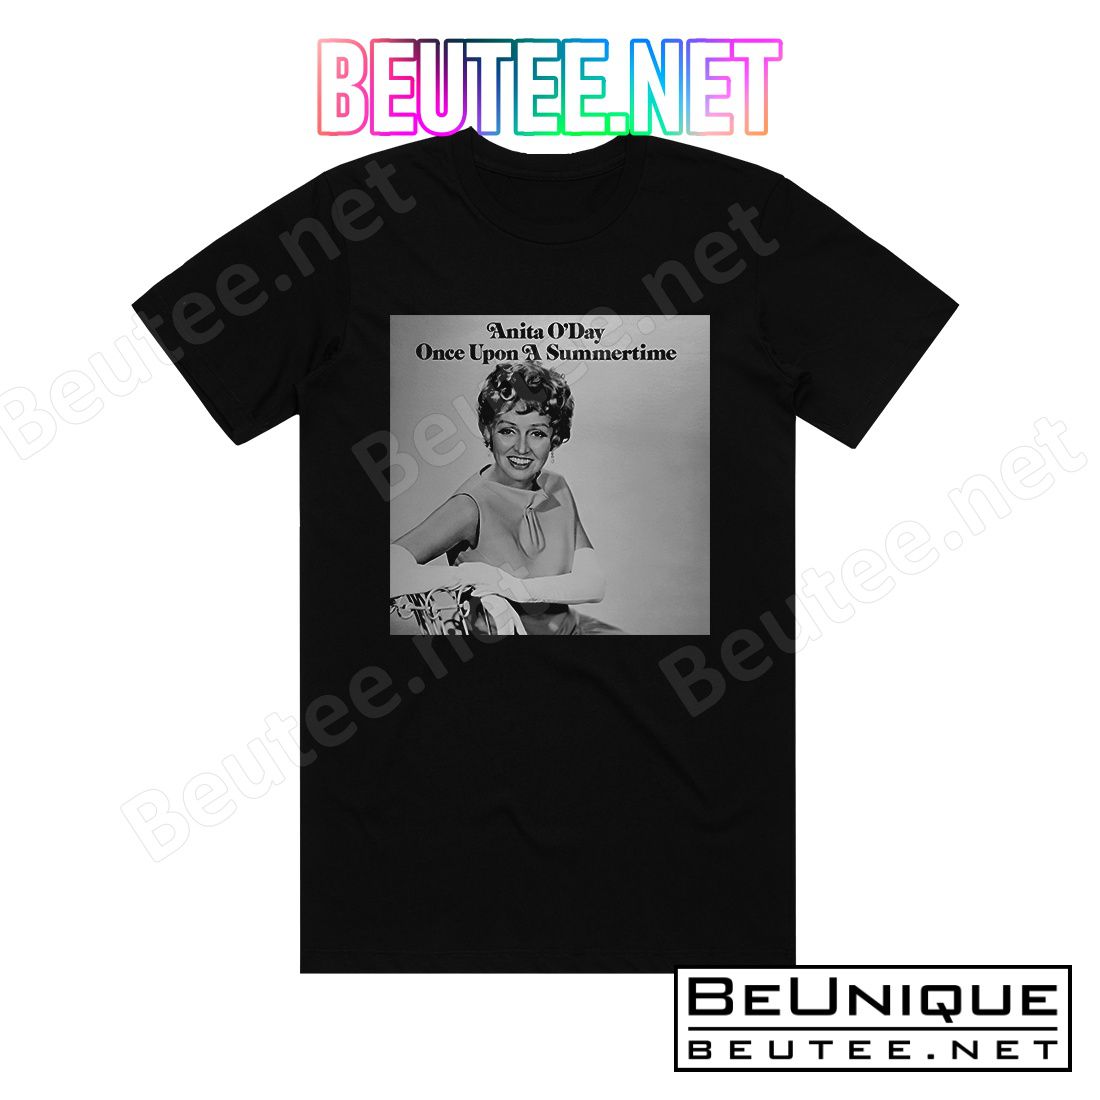 Anita O'Day Once Upon A Summertime Album Cover T-Shirt